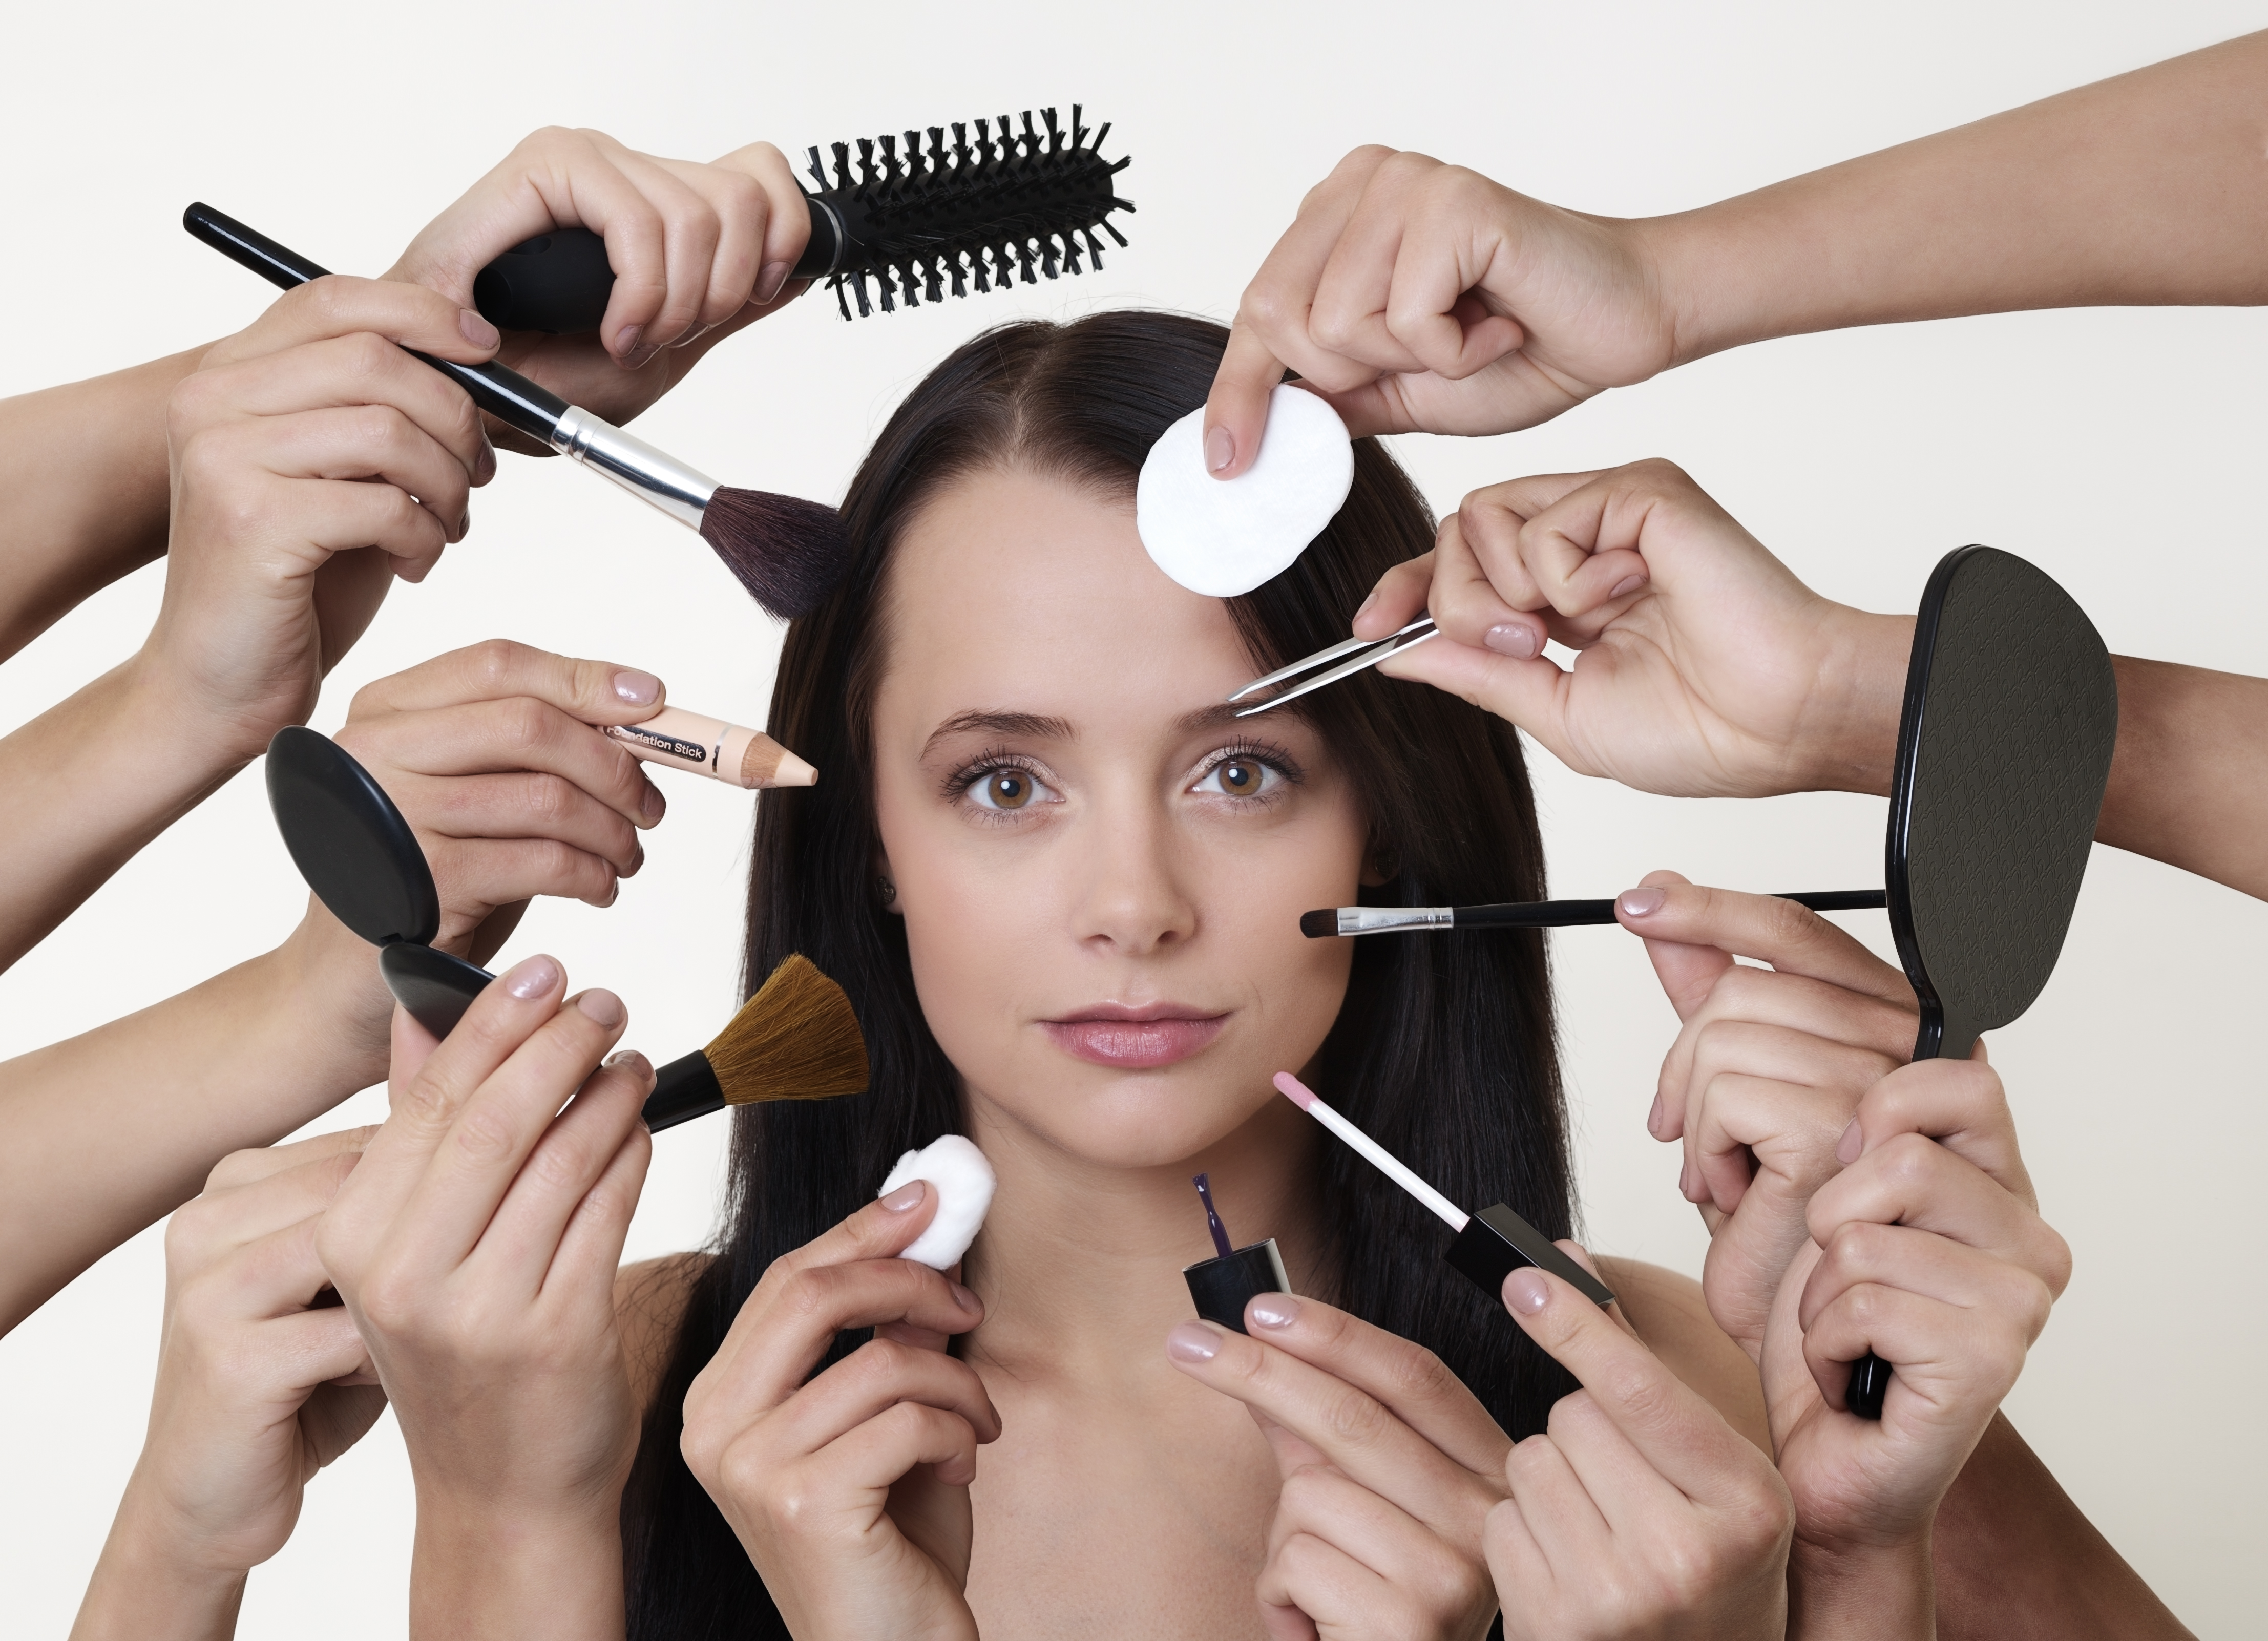 woman doing make up with many hands and arms helping her get the job done faster